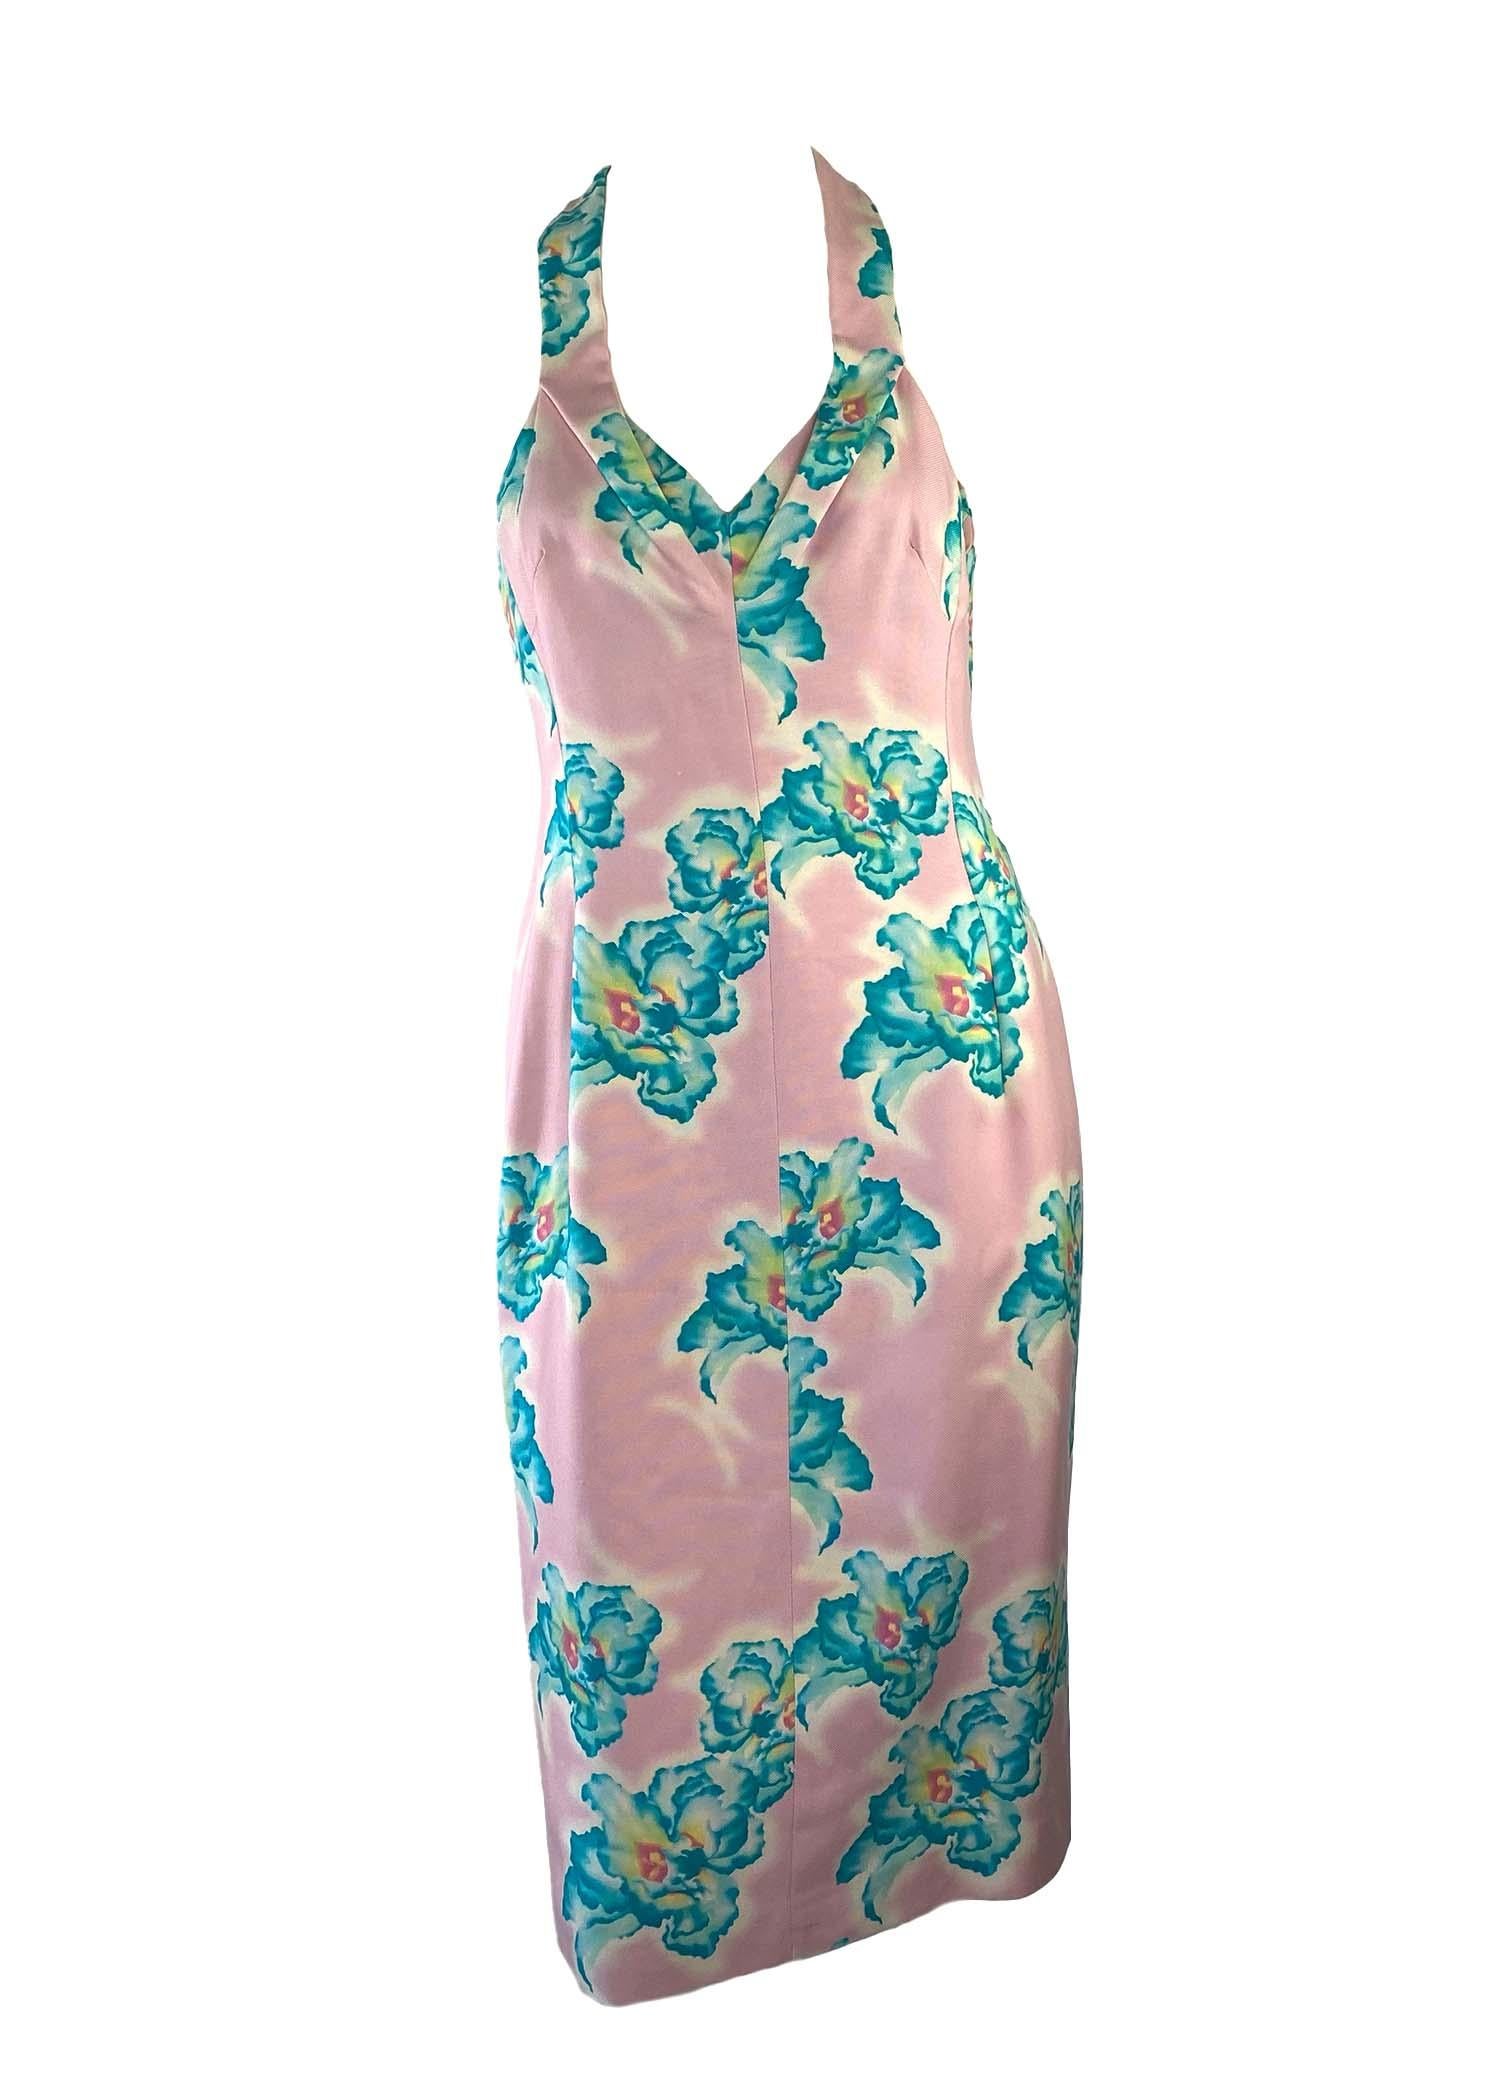 Women's S/S 1999 Gianni Versace by Donatella Pink Halter Neck Blue Floral Dress  For Sale